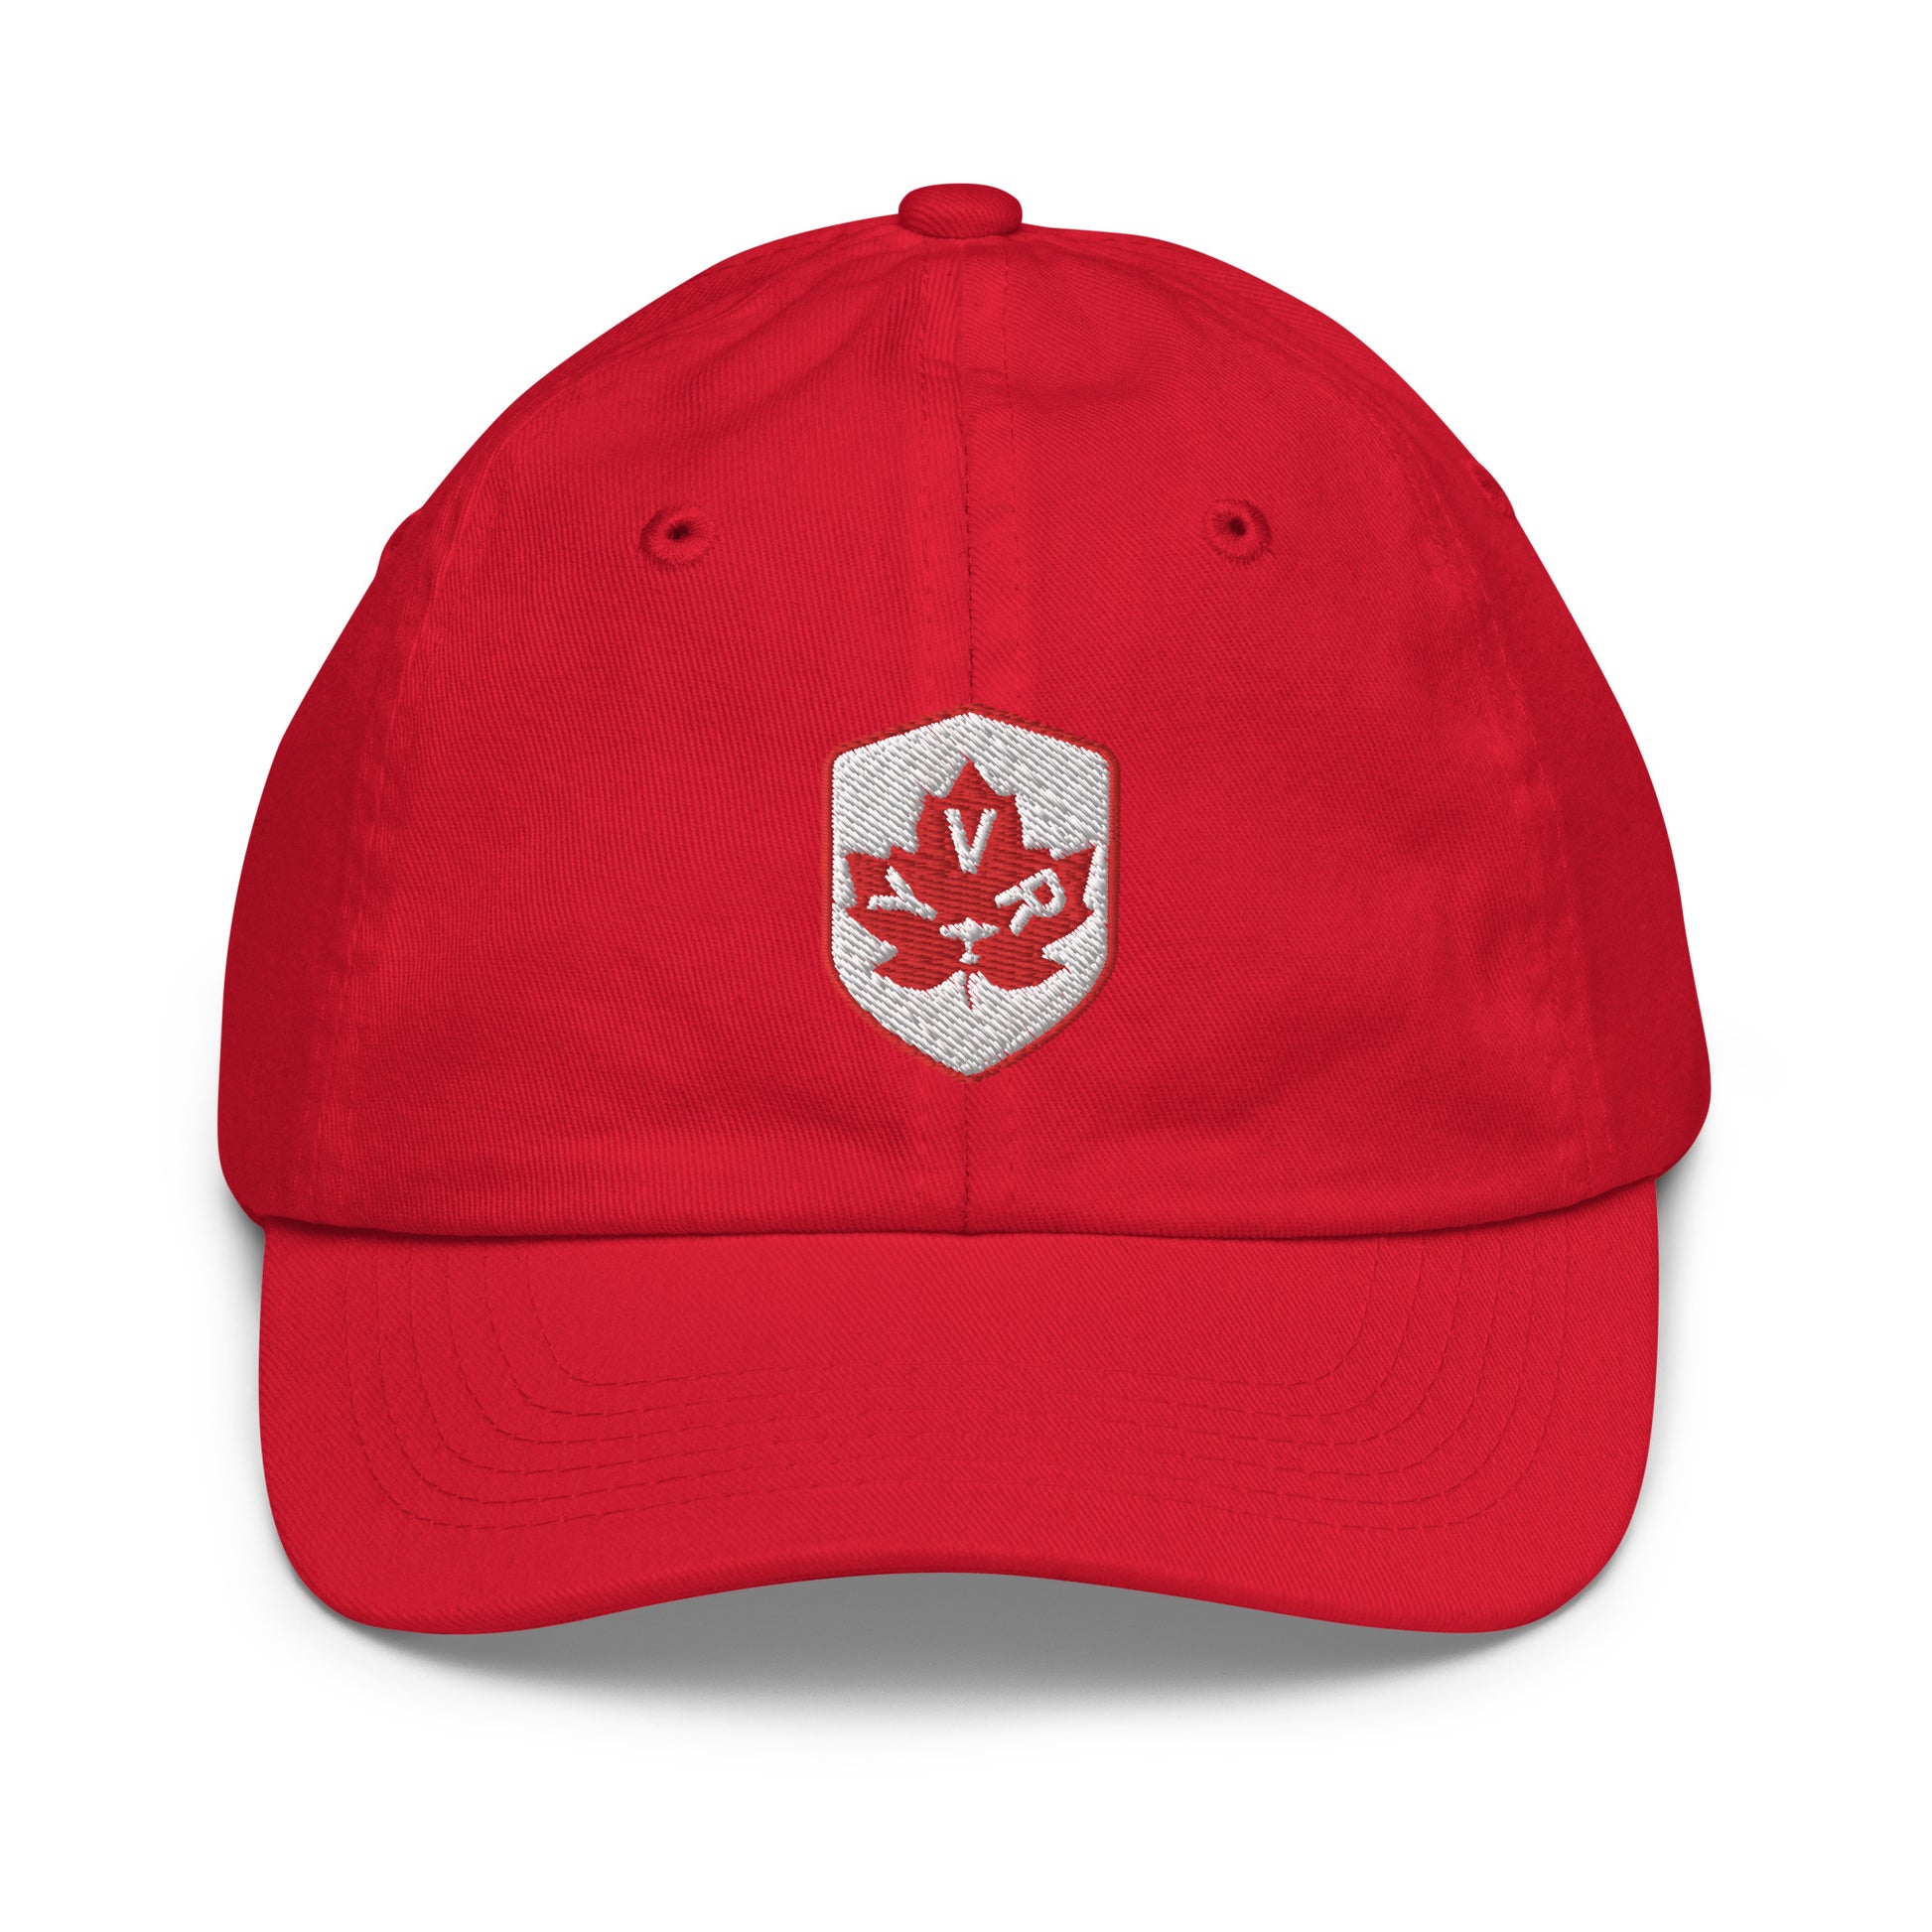 Maple Leaf Kid's Cap - Red/White • YVR Vancouver • YHM Designs - Image 16